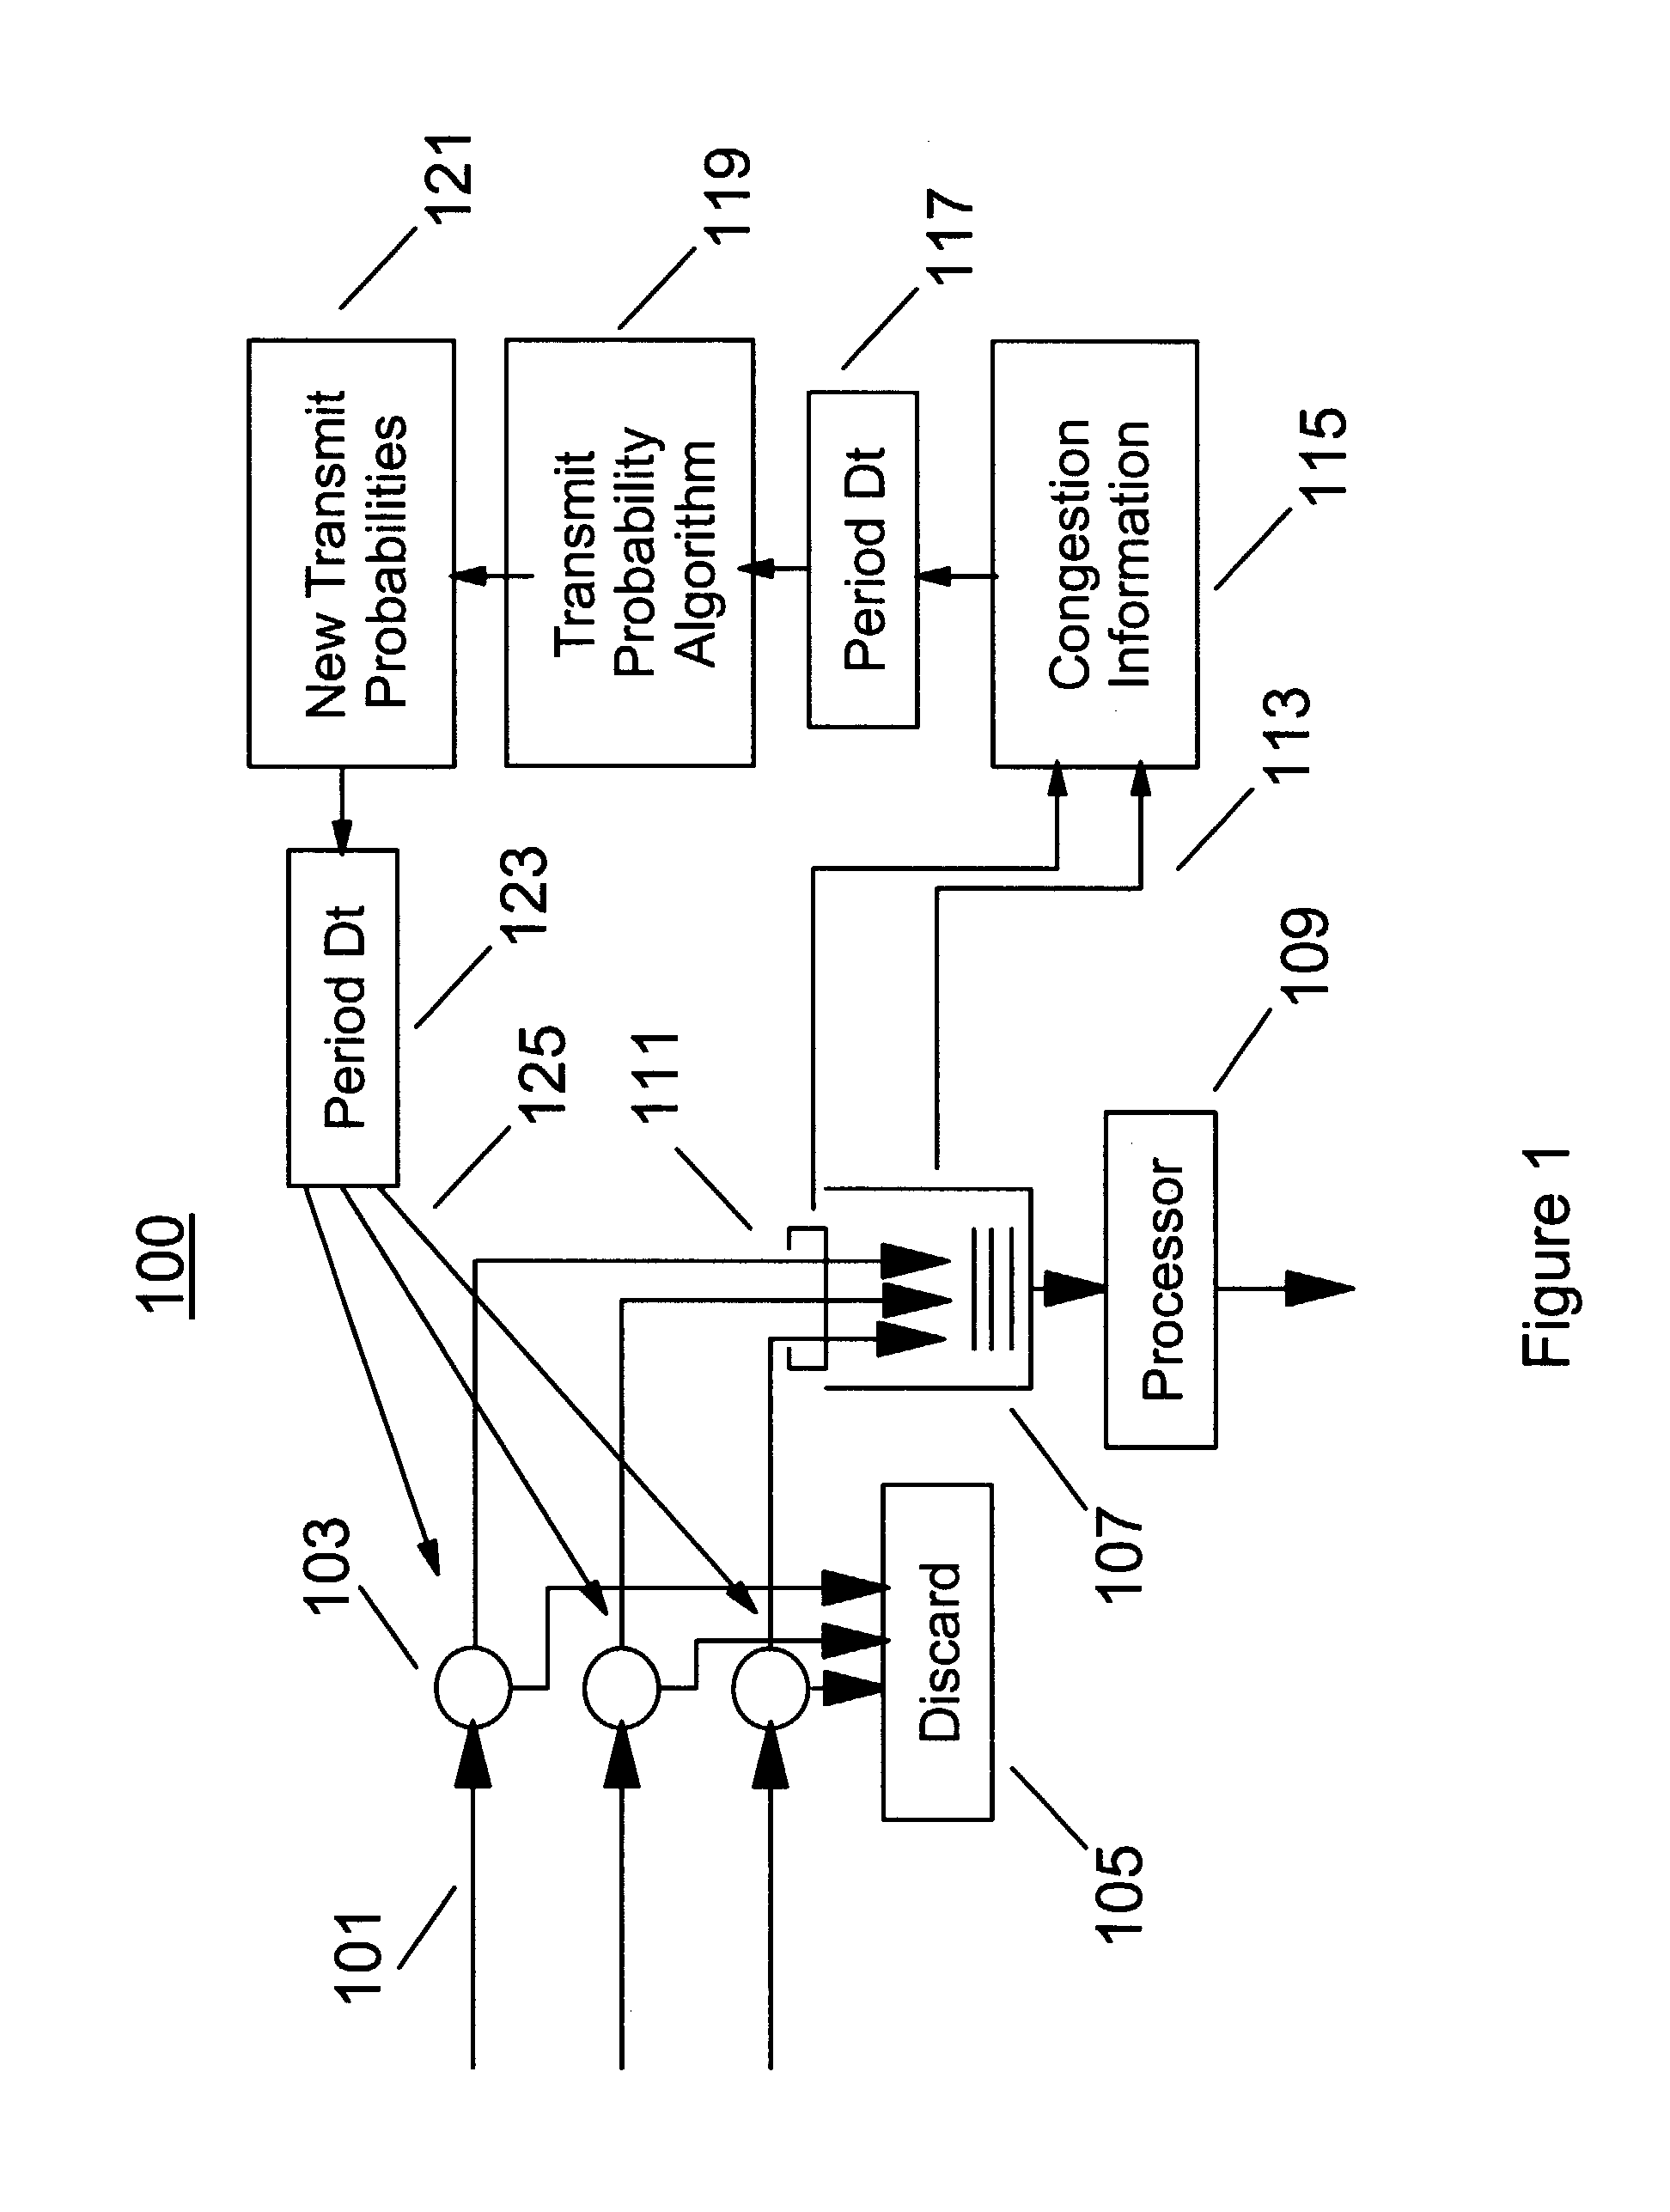 System and method for automatic management of many computer data processing system pipes